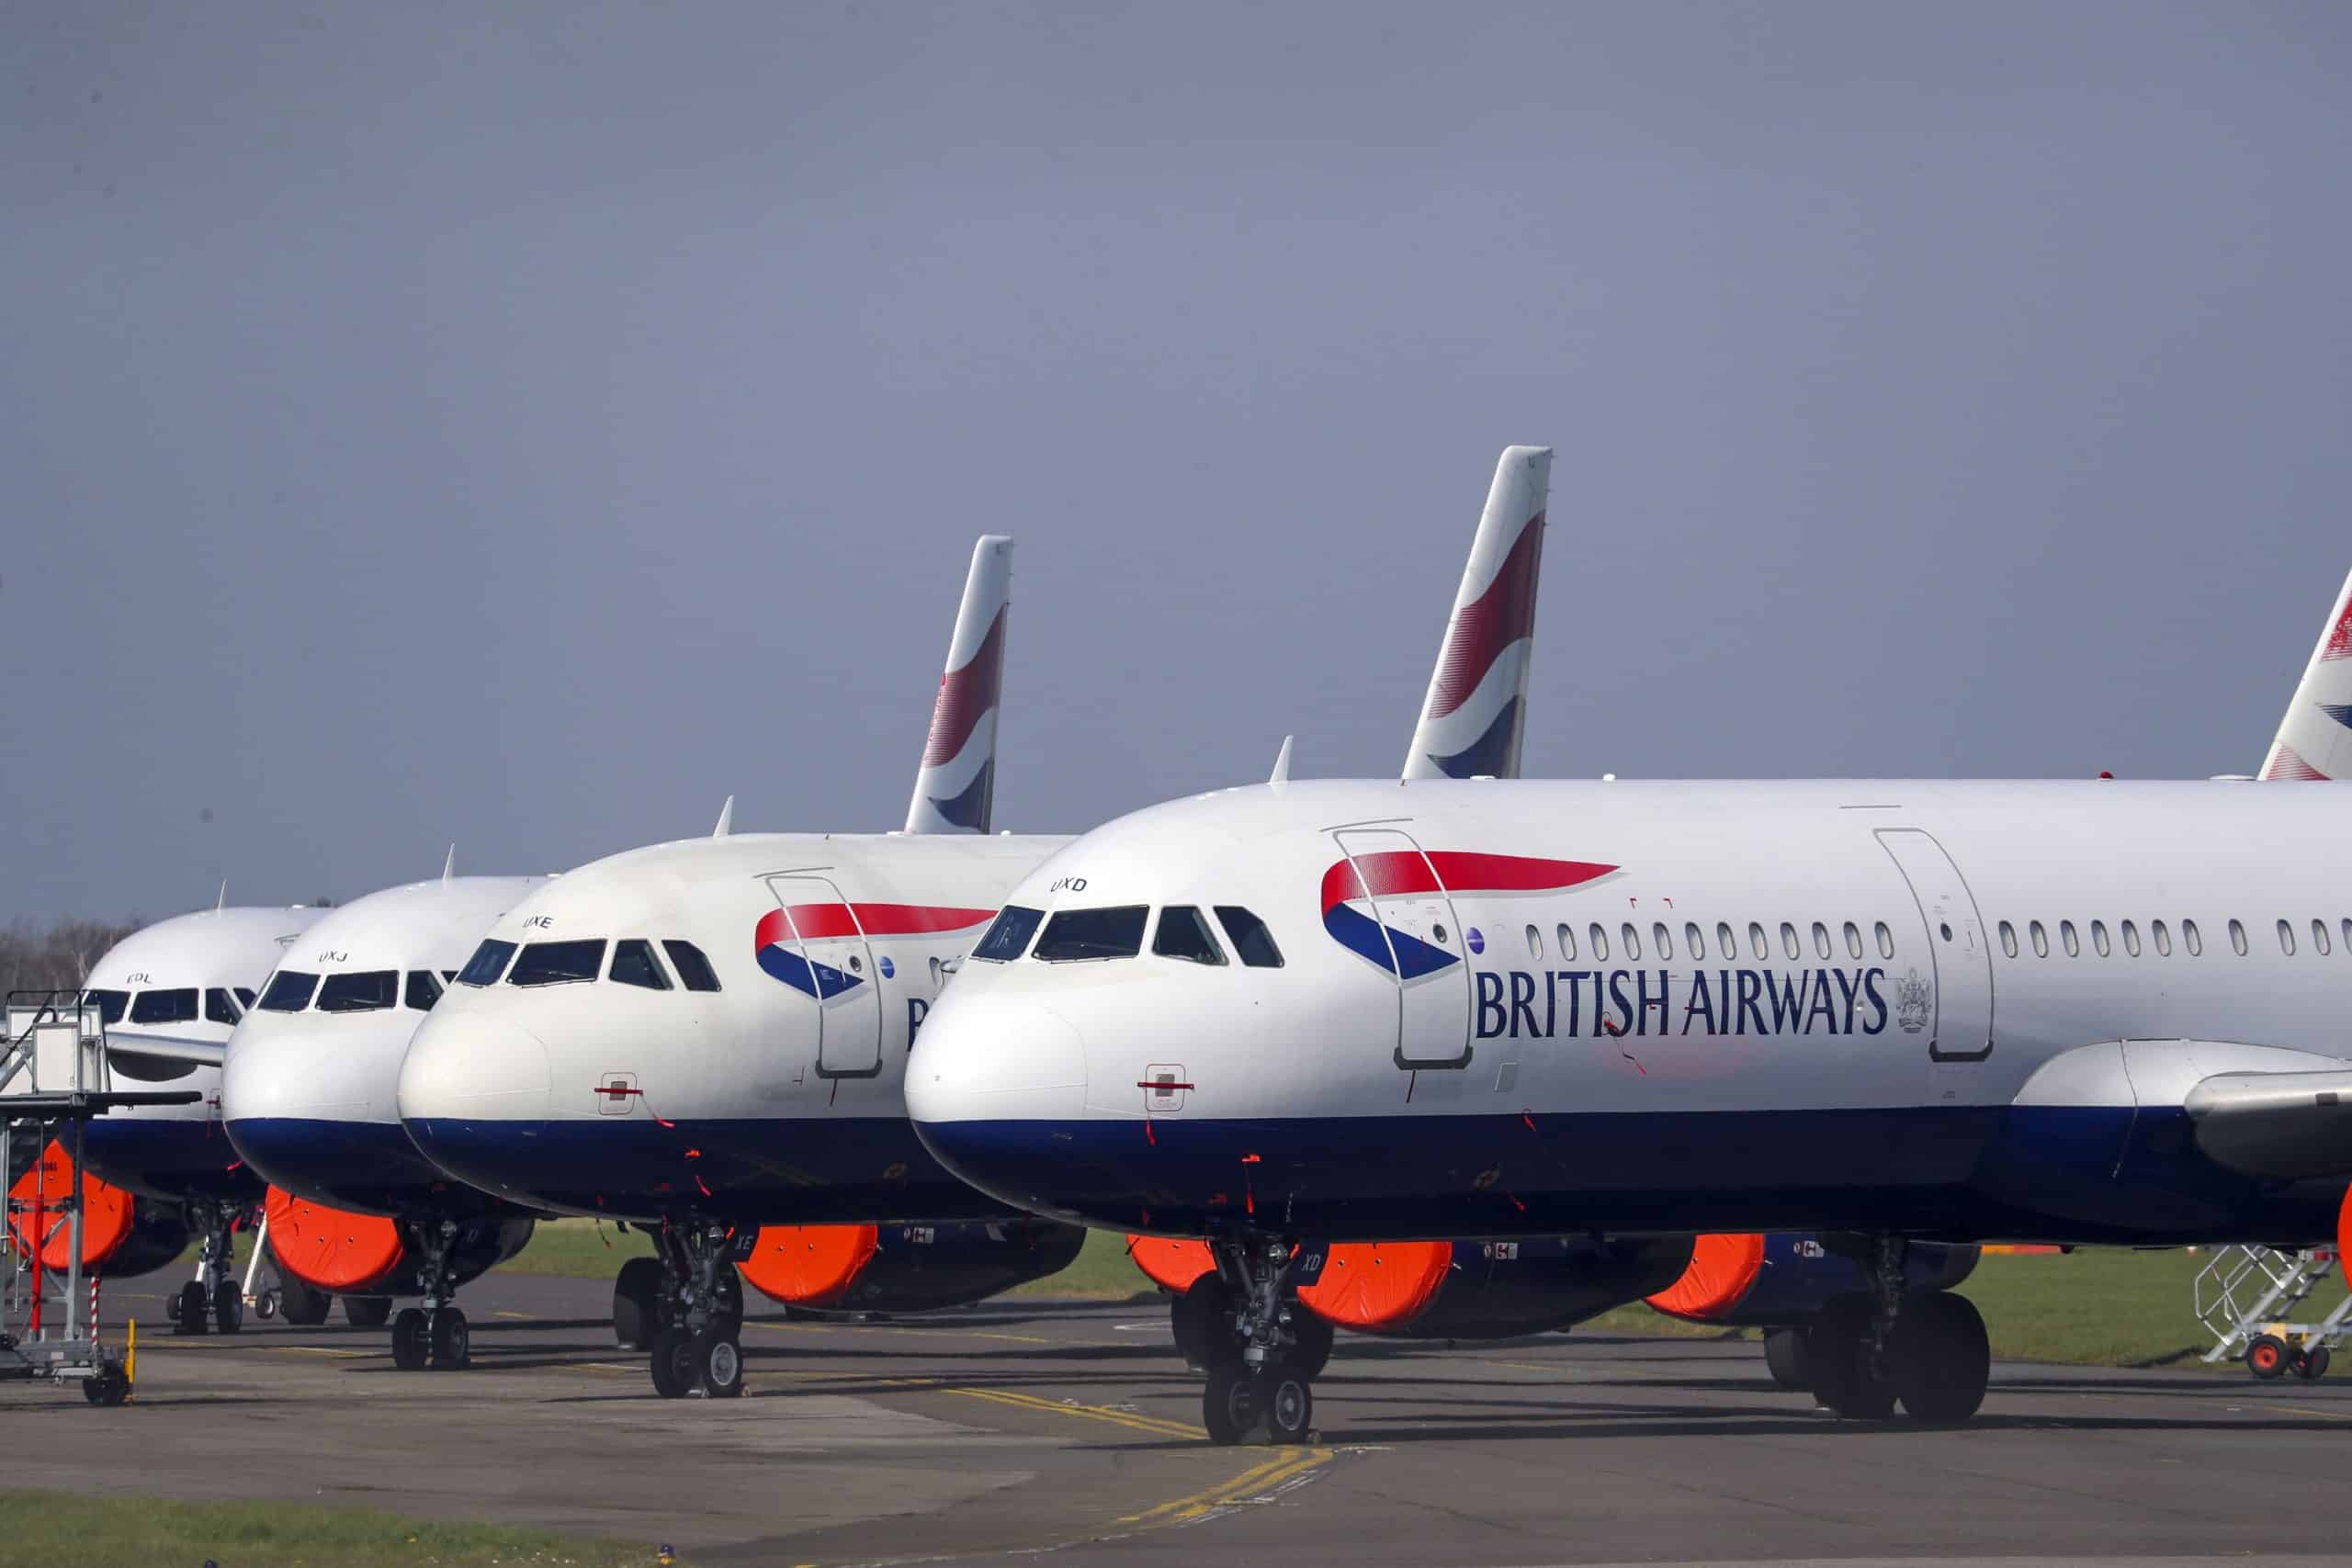 Government has not ruled out taking stake in struggling airlines